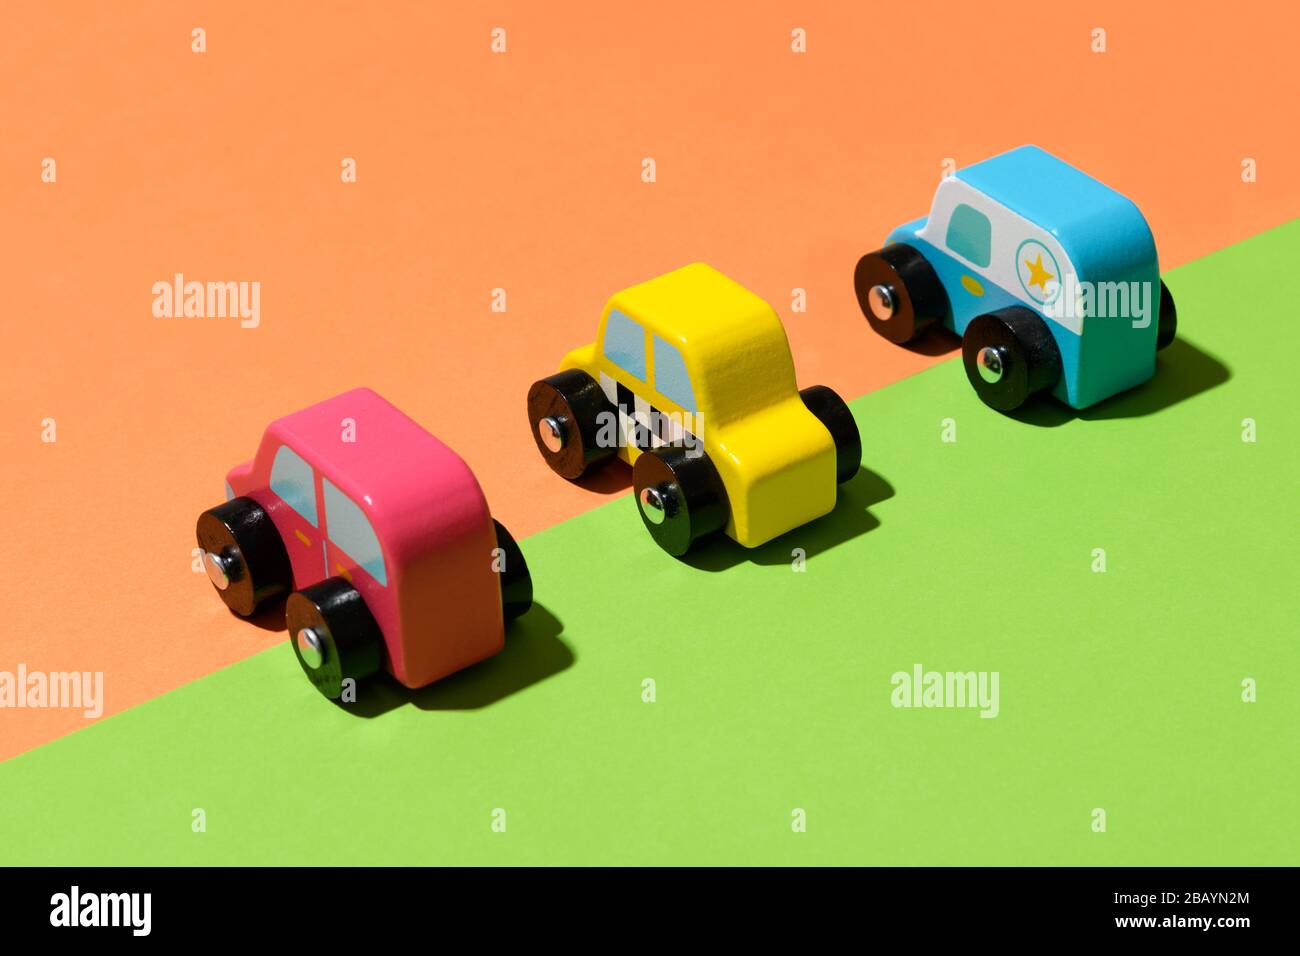 Three colorful rustic wooden handcrafted toy cars on a split green and orange background lined up along the diagonal division of color Stock Photo